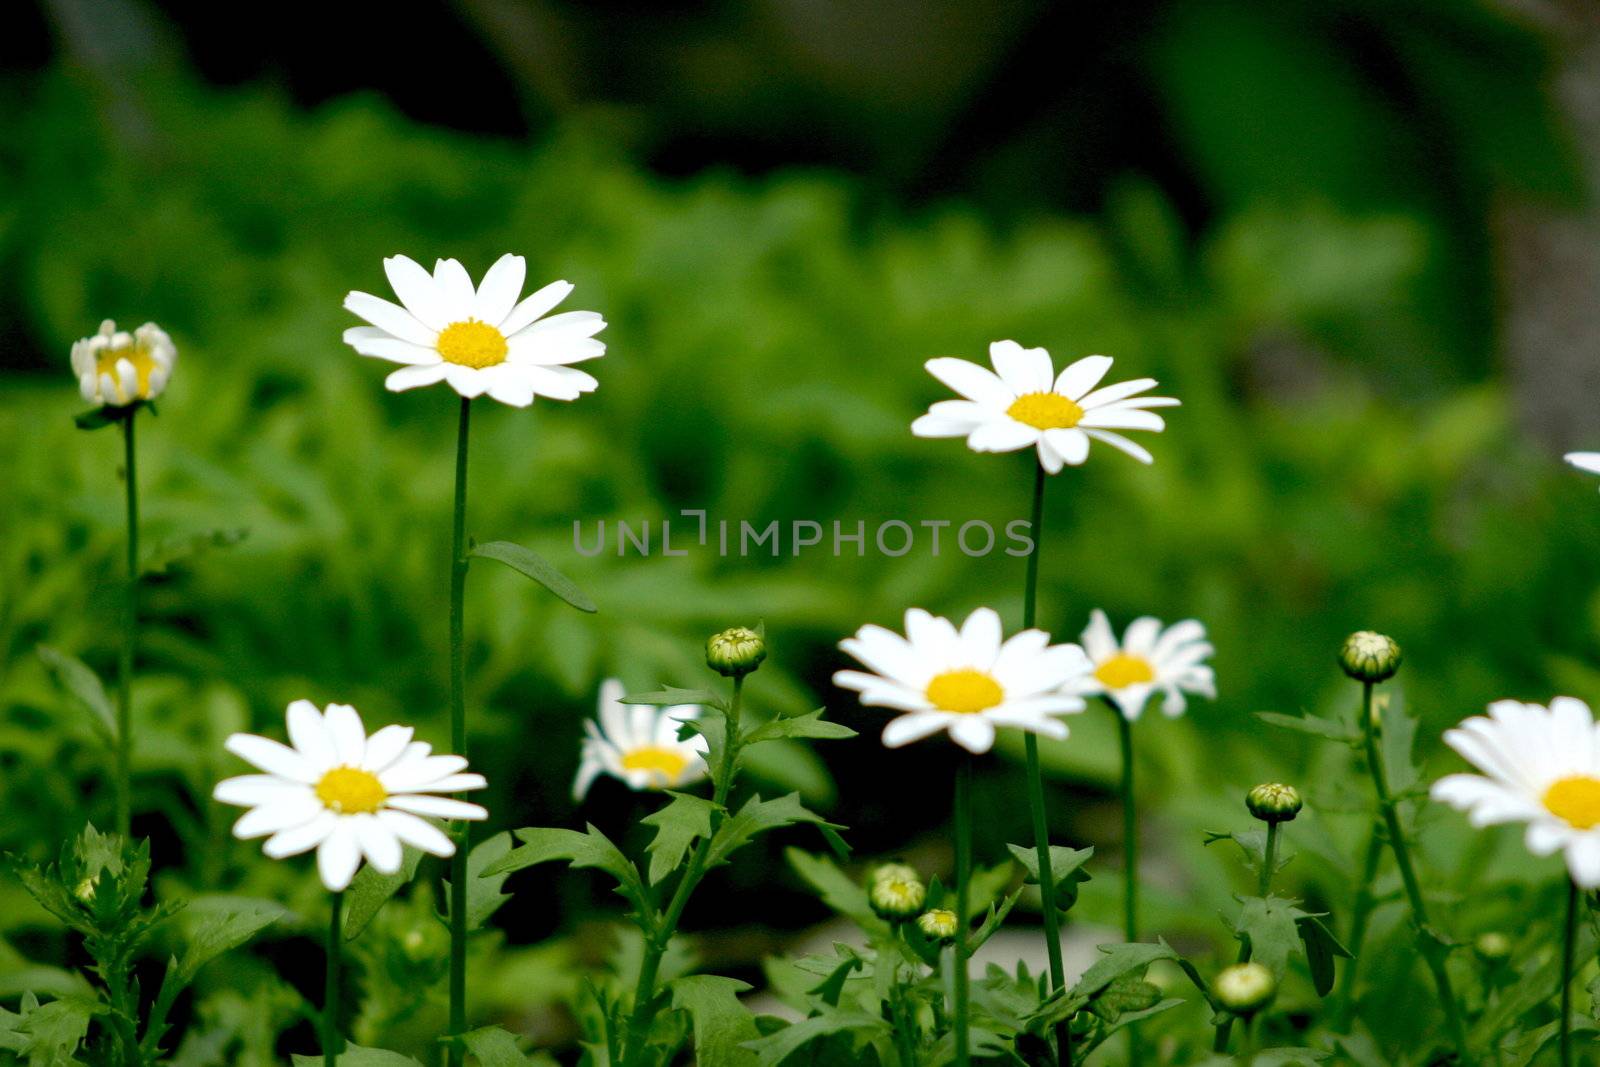 daisies growing in the foreground of the picture